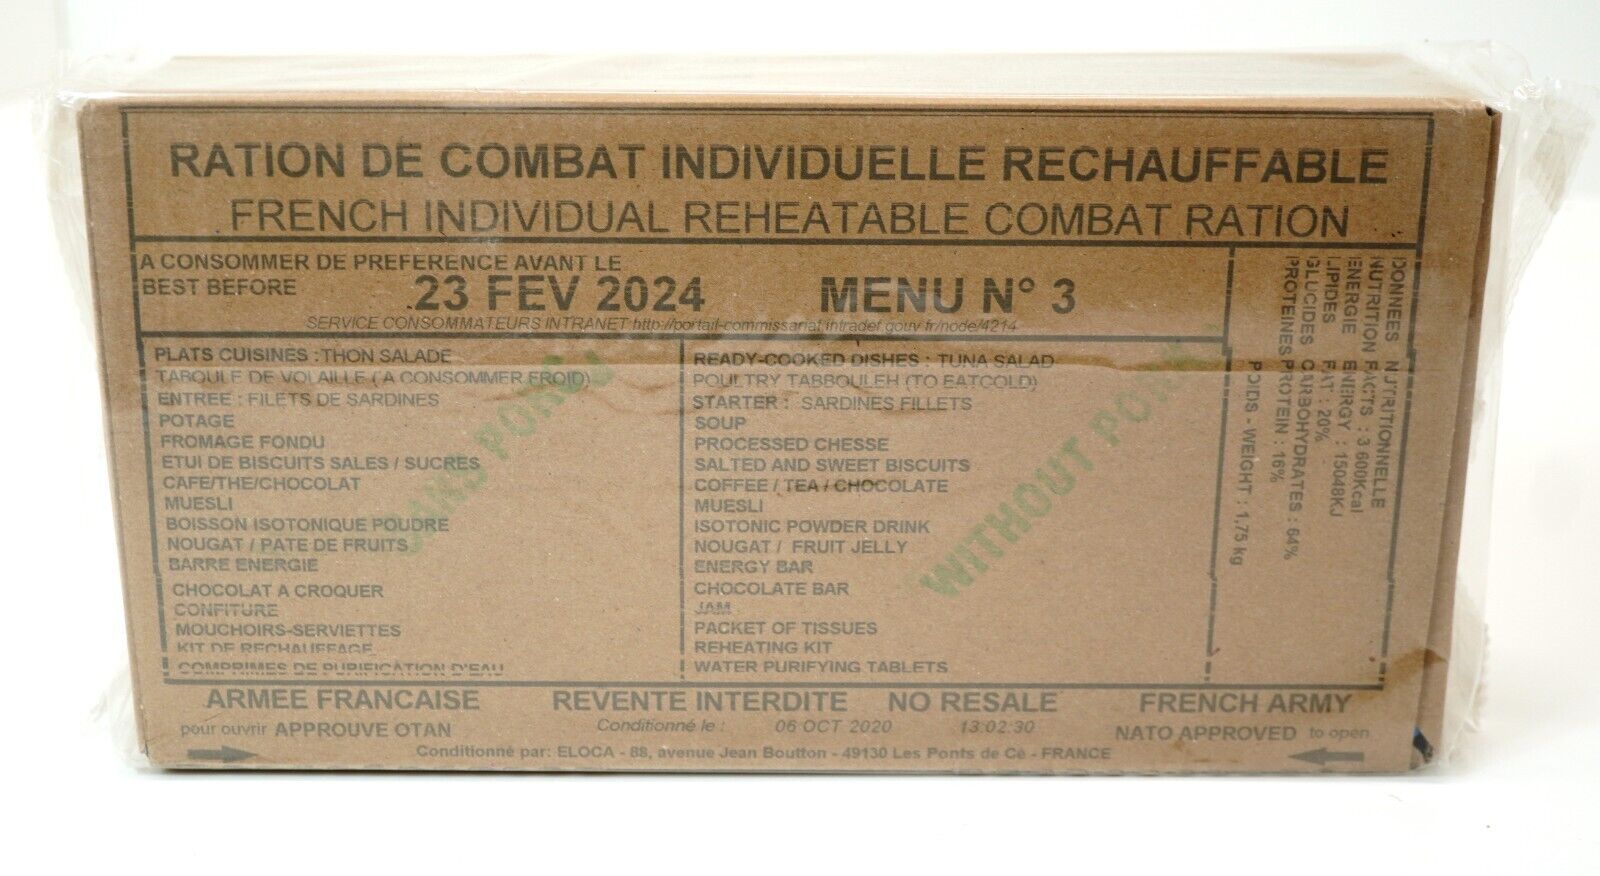 French Army RCIR Ration Pack Menu 3 (Expired FEB 2024) 24 Hour Meal Military MRE